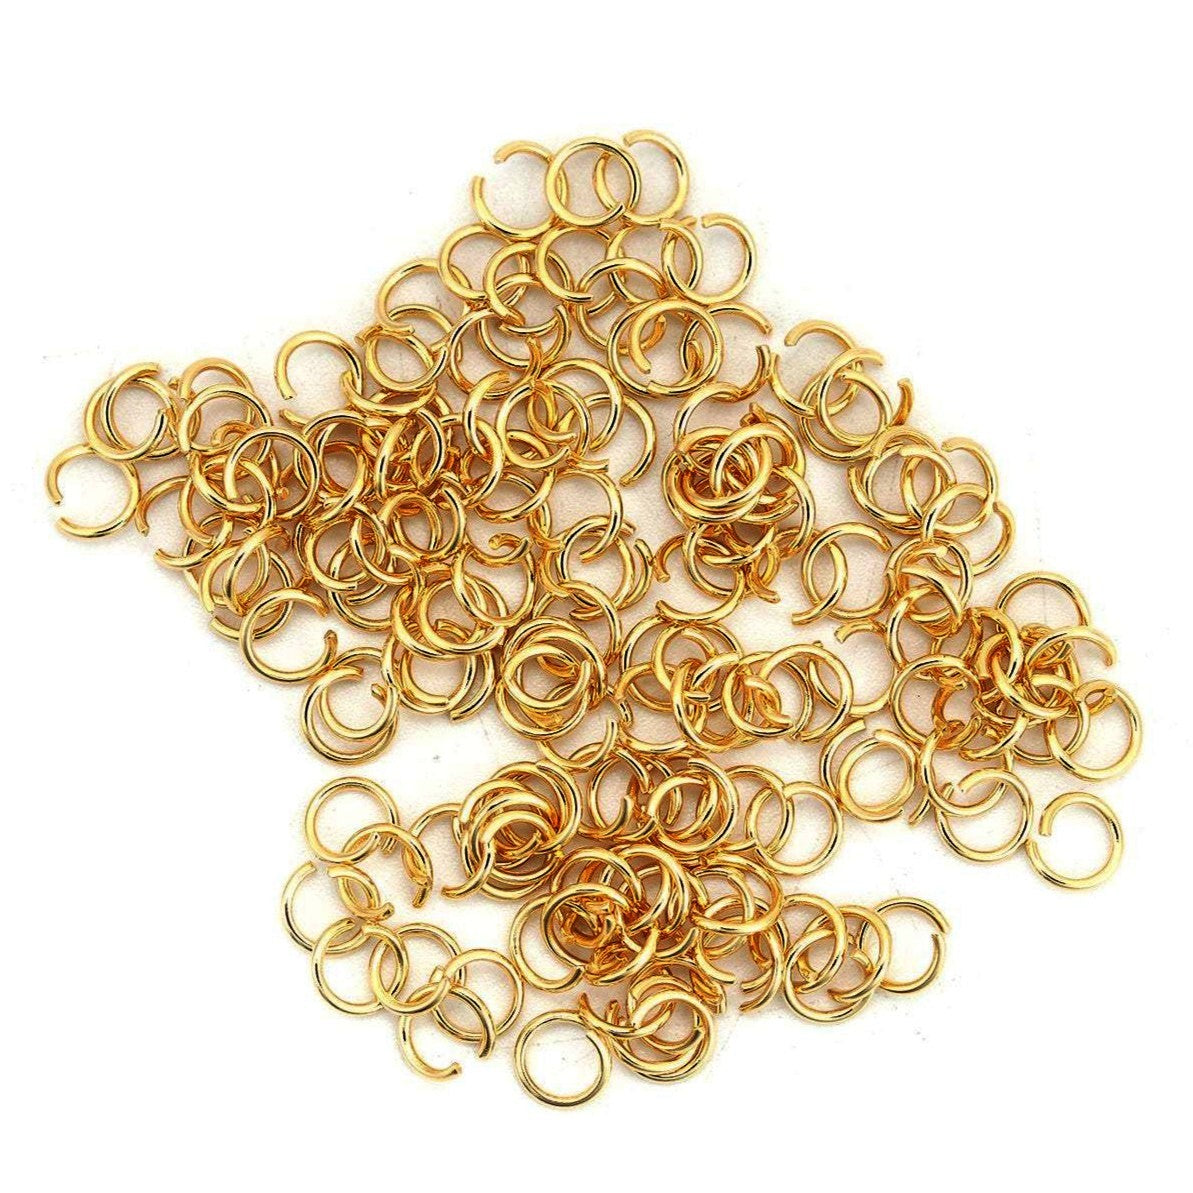 Brass jump ring 5mm, 7mm - 100pcs - Nickel free, lead free and cadmium free